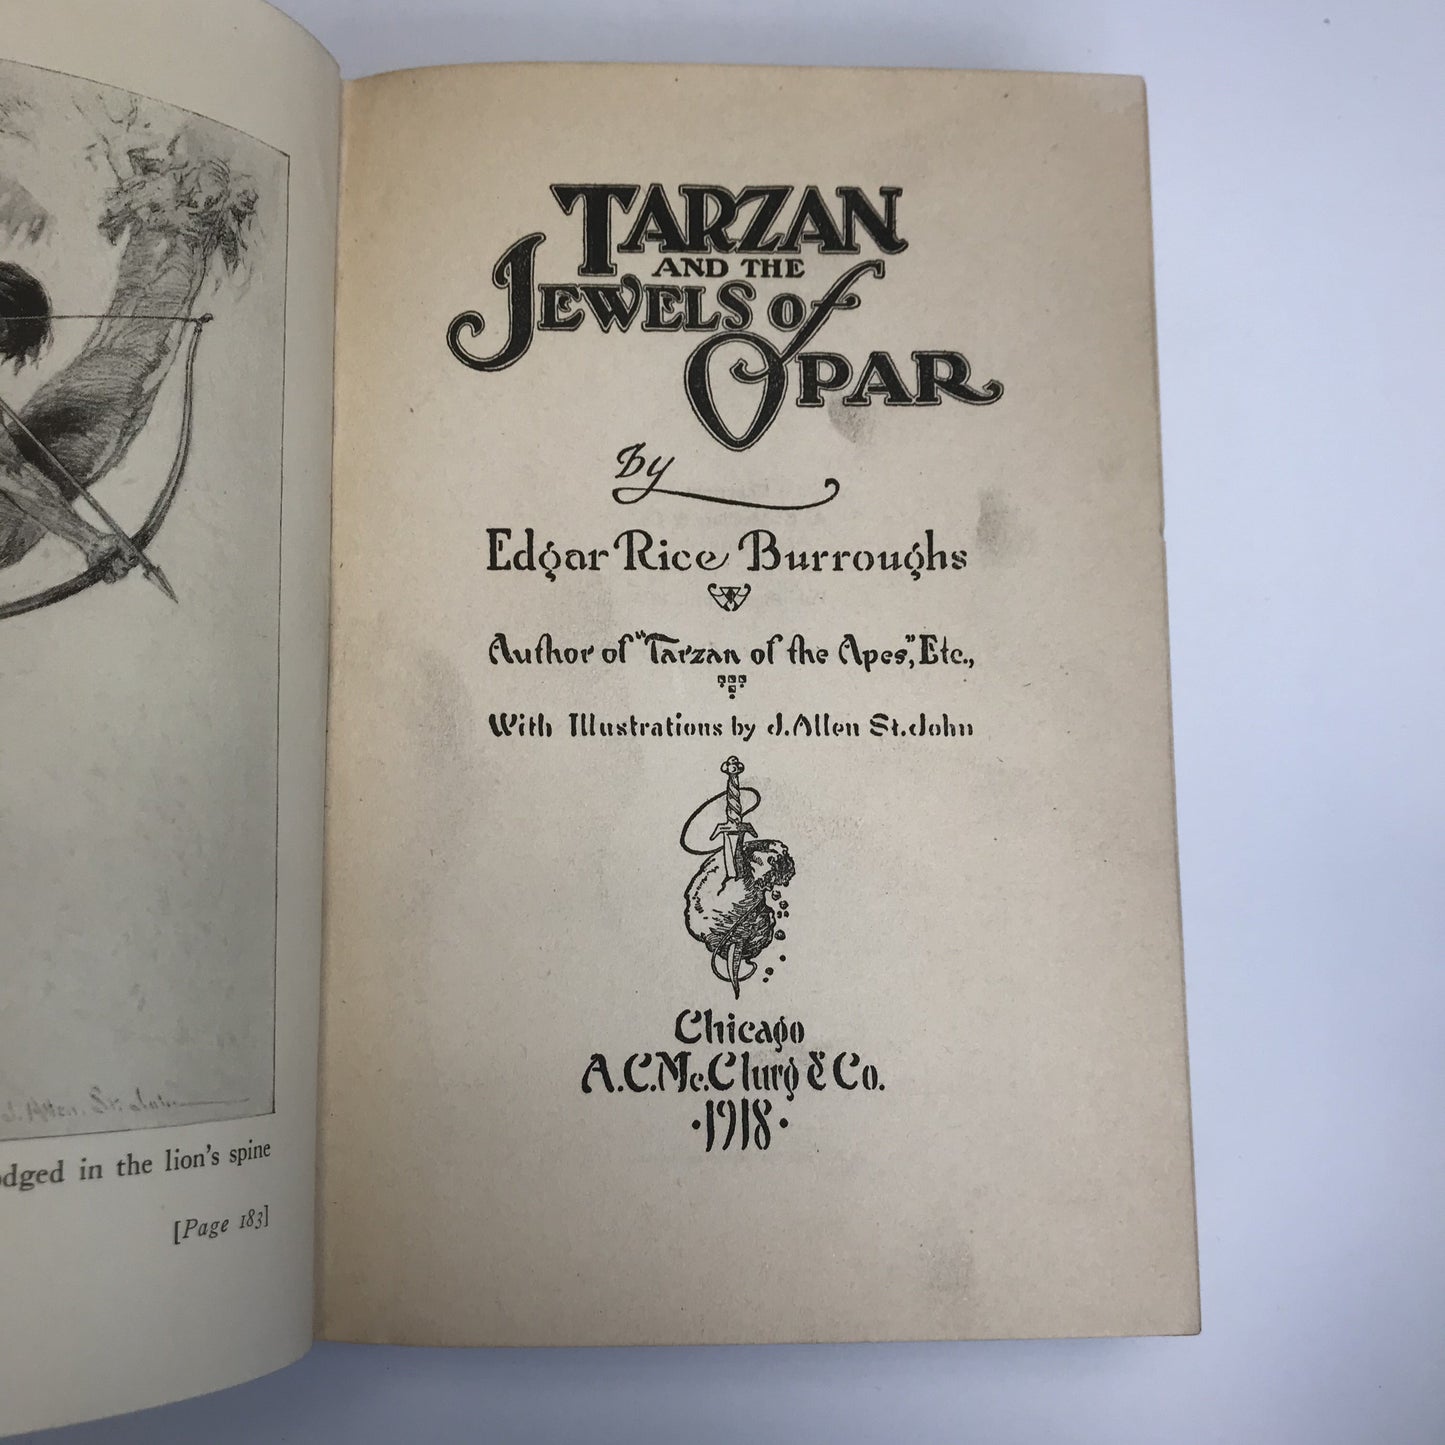 Tarzan and the Jewels of Opar - Edgar Rice Burroughs - 1st Edition